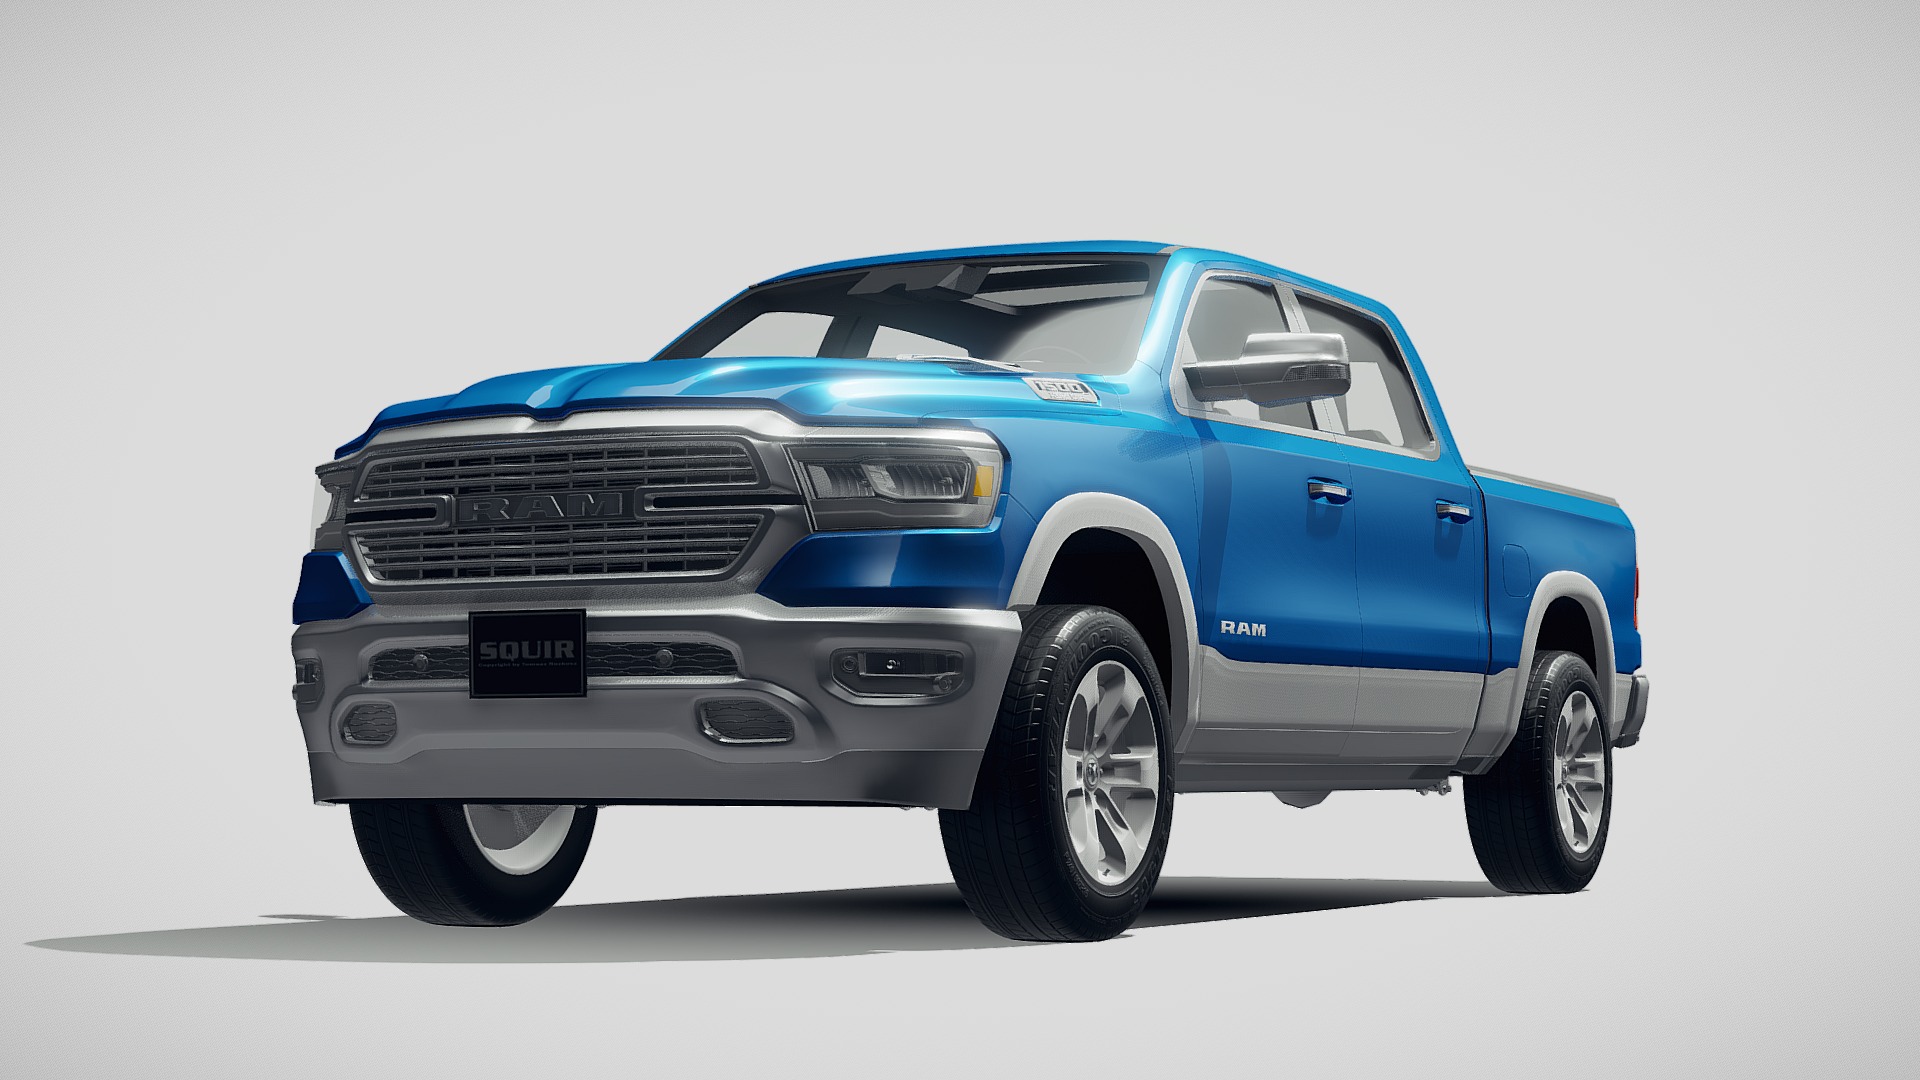 3D model Dodge Ram Laramie 2019 - This is a 3D model of the Dodge Ram Laramie 2019. The 3D model is about a blue car with a white background.